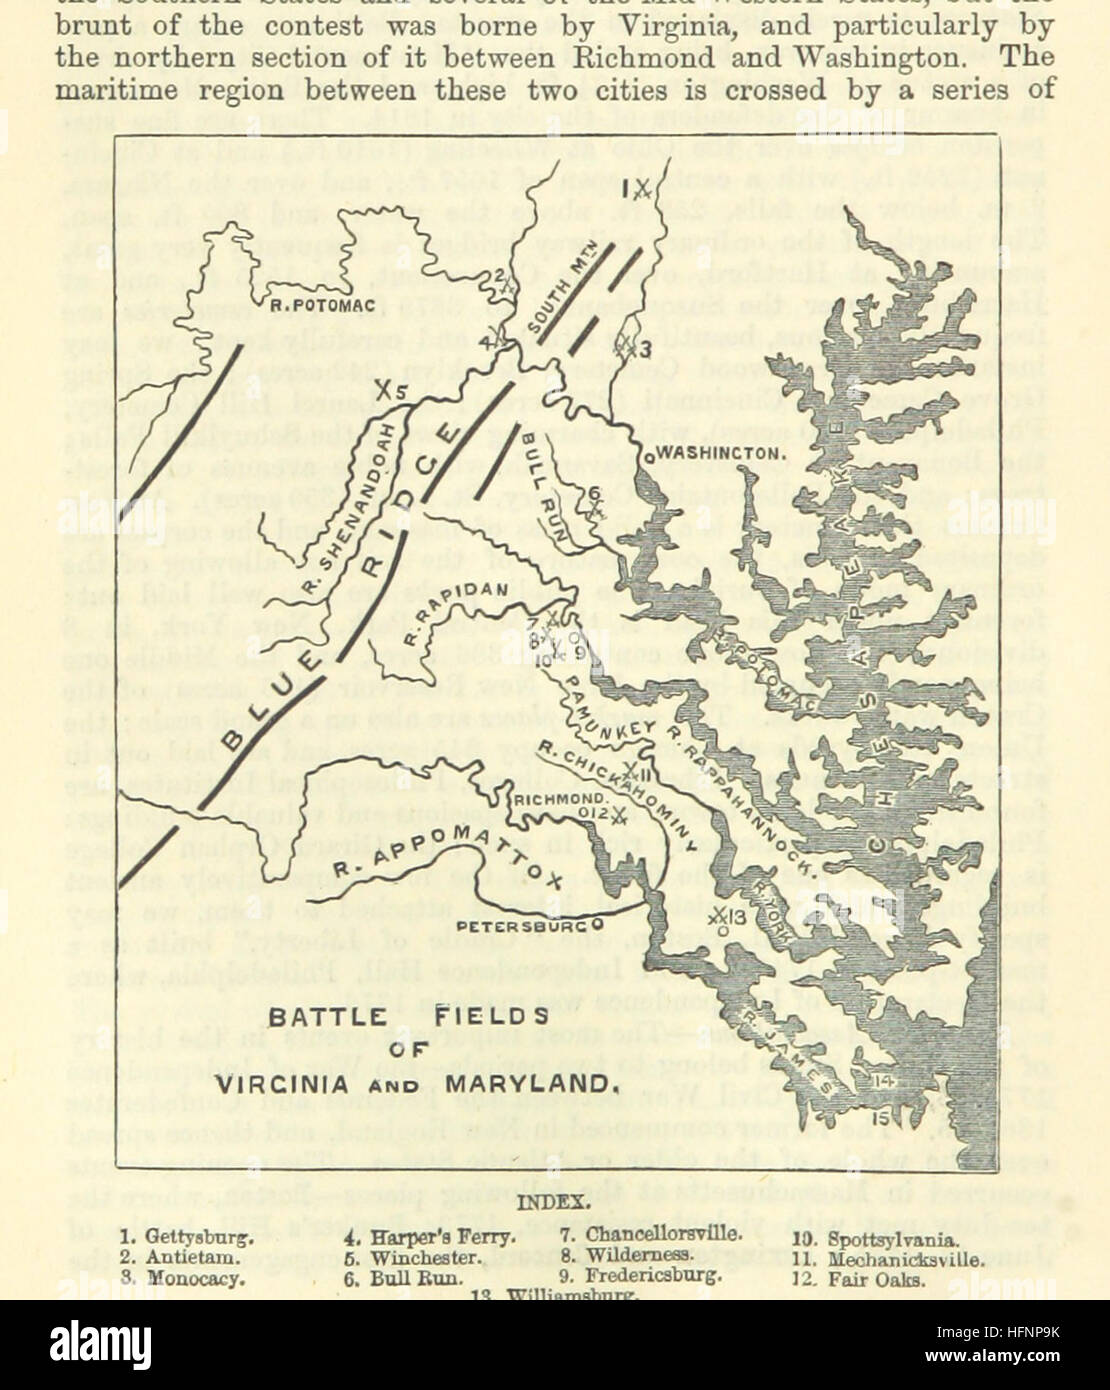 Image taken from page 578 of '[The Student's Manual of Modern Geography. Mathematical, physical, and descriptive.]' Image taken from page 578 of '[The Student's Manual of Stock Photo